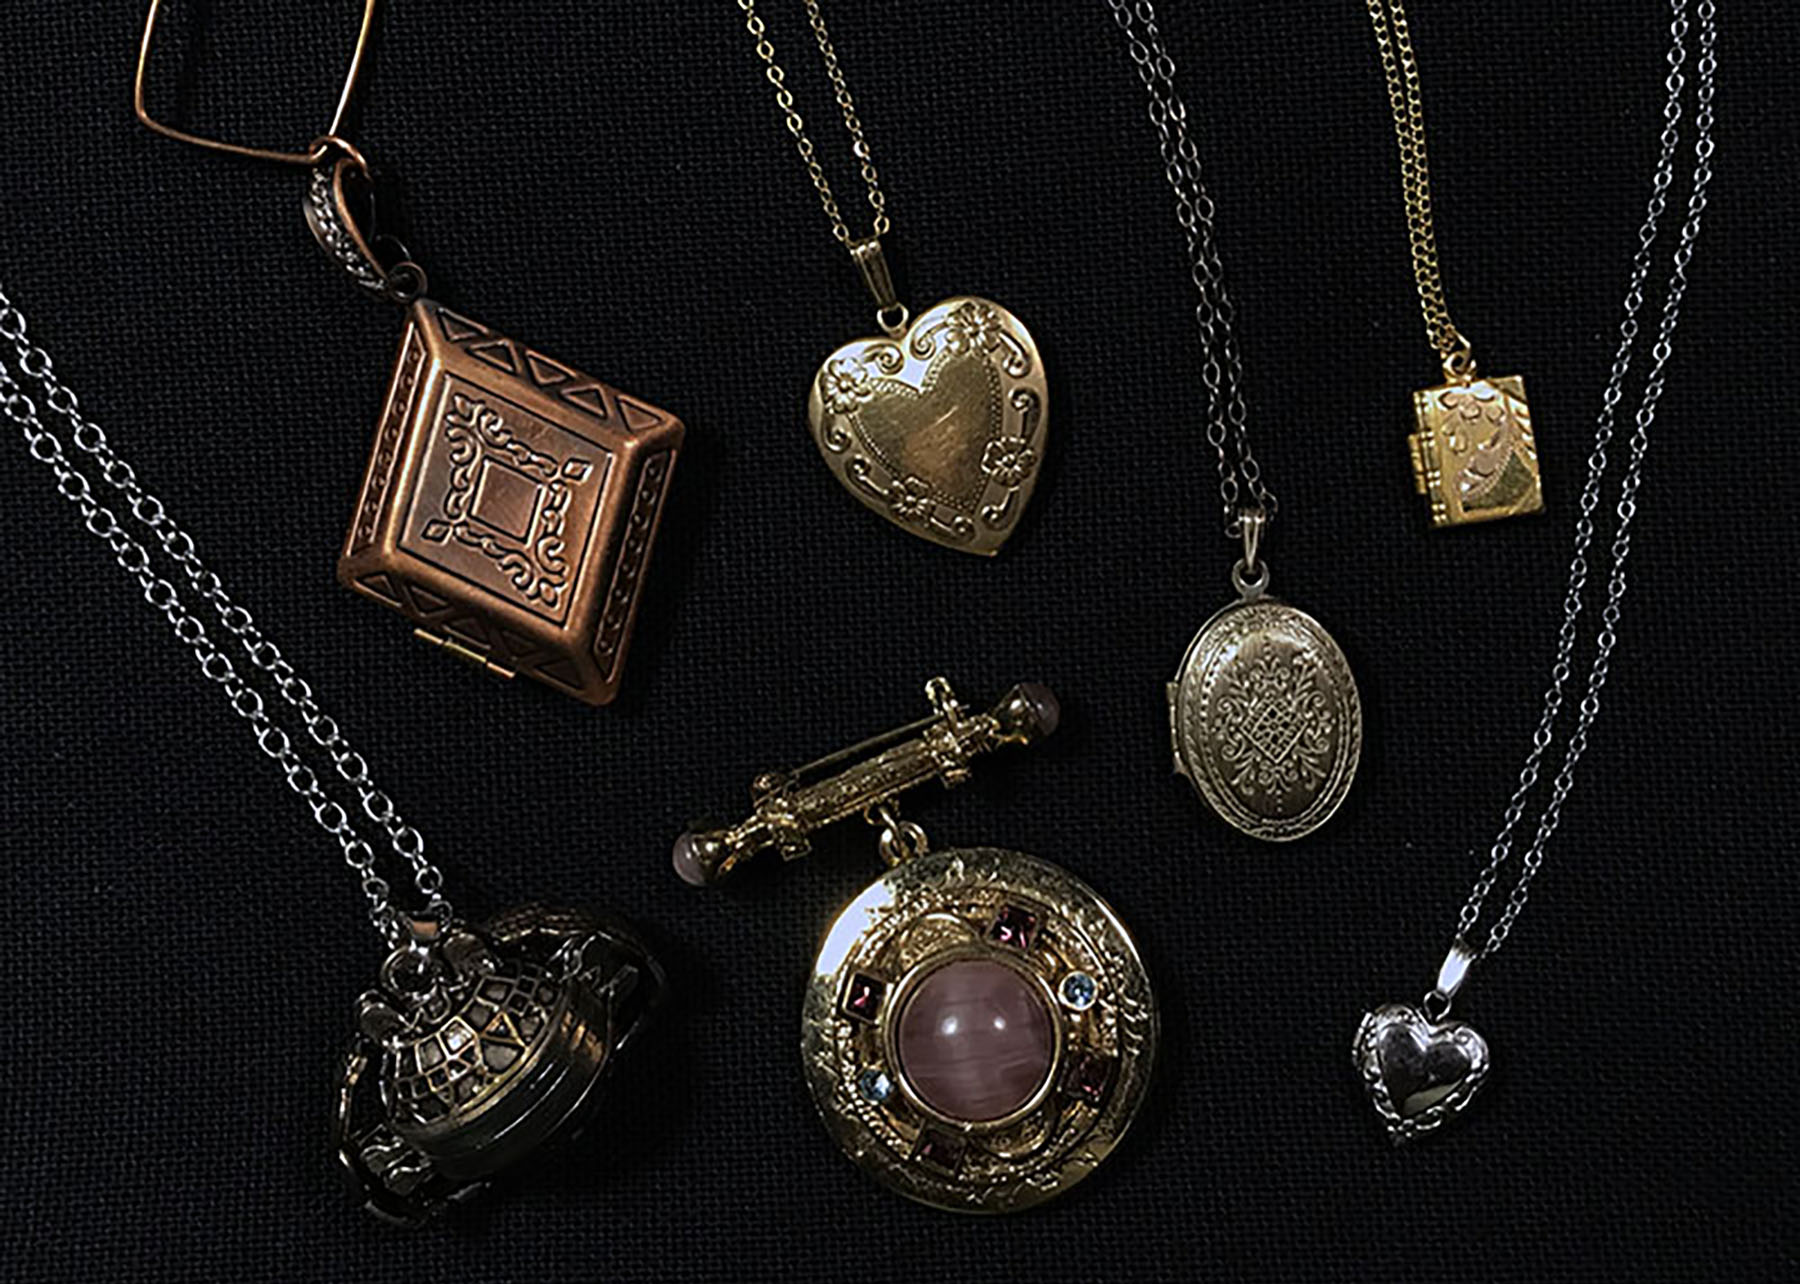 PHOTO LOCKETS – A TIMELESS GIFT